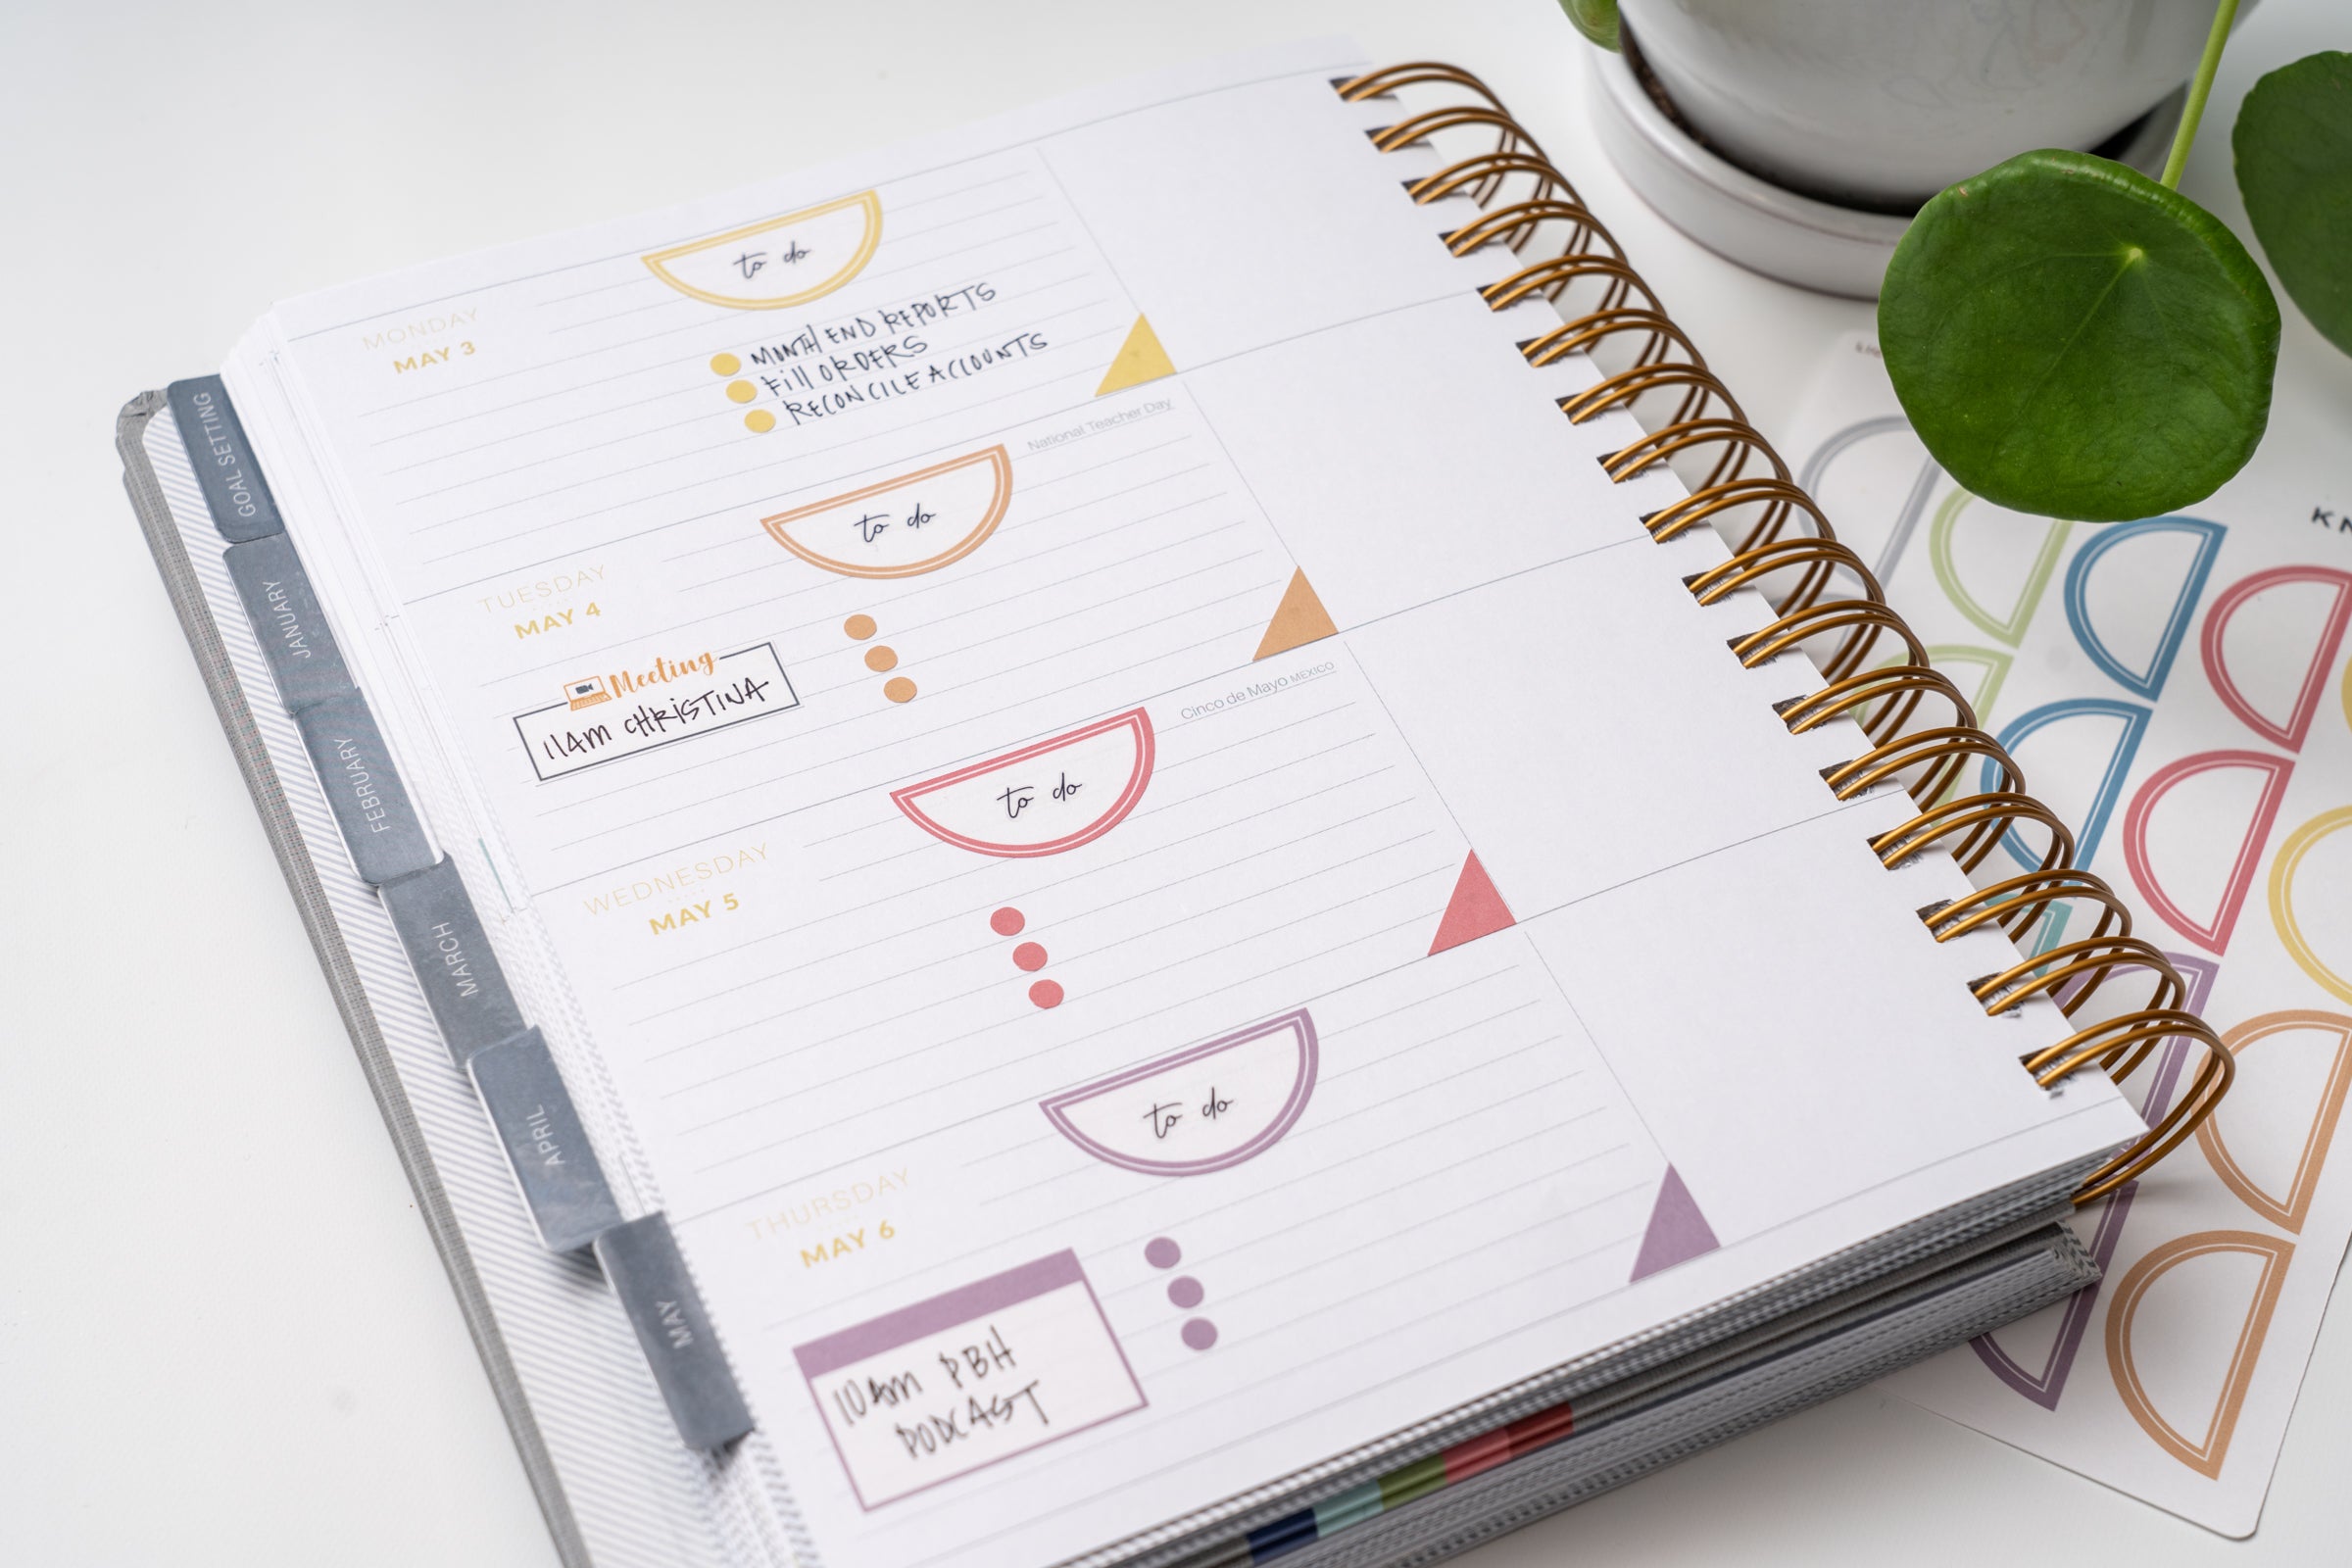 Personalize Your Planner: 4 Ways to Use Shape Stickers